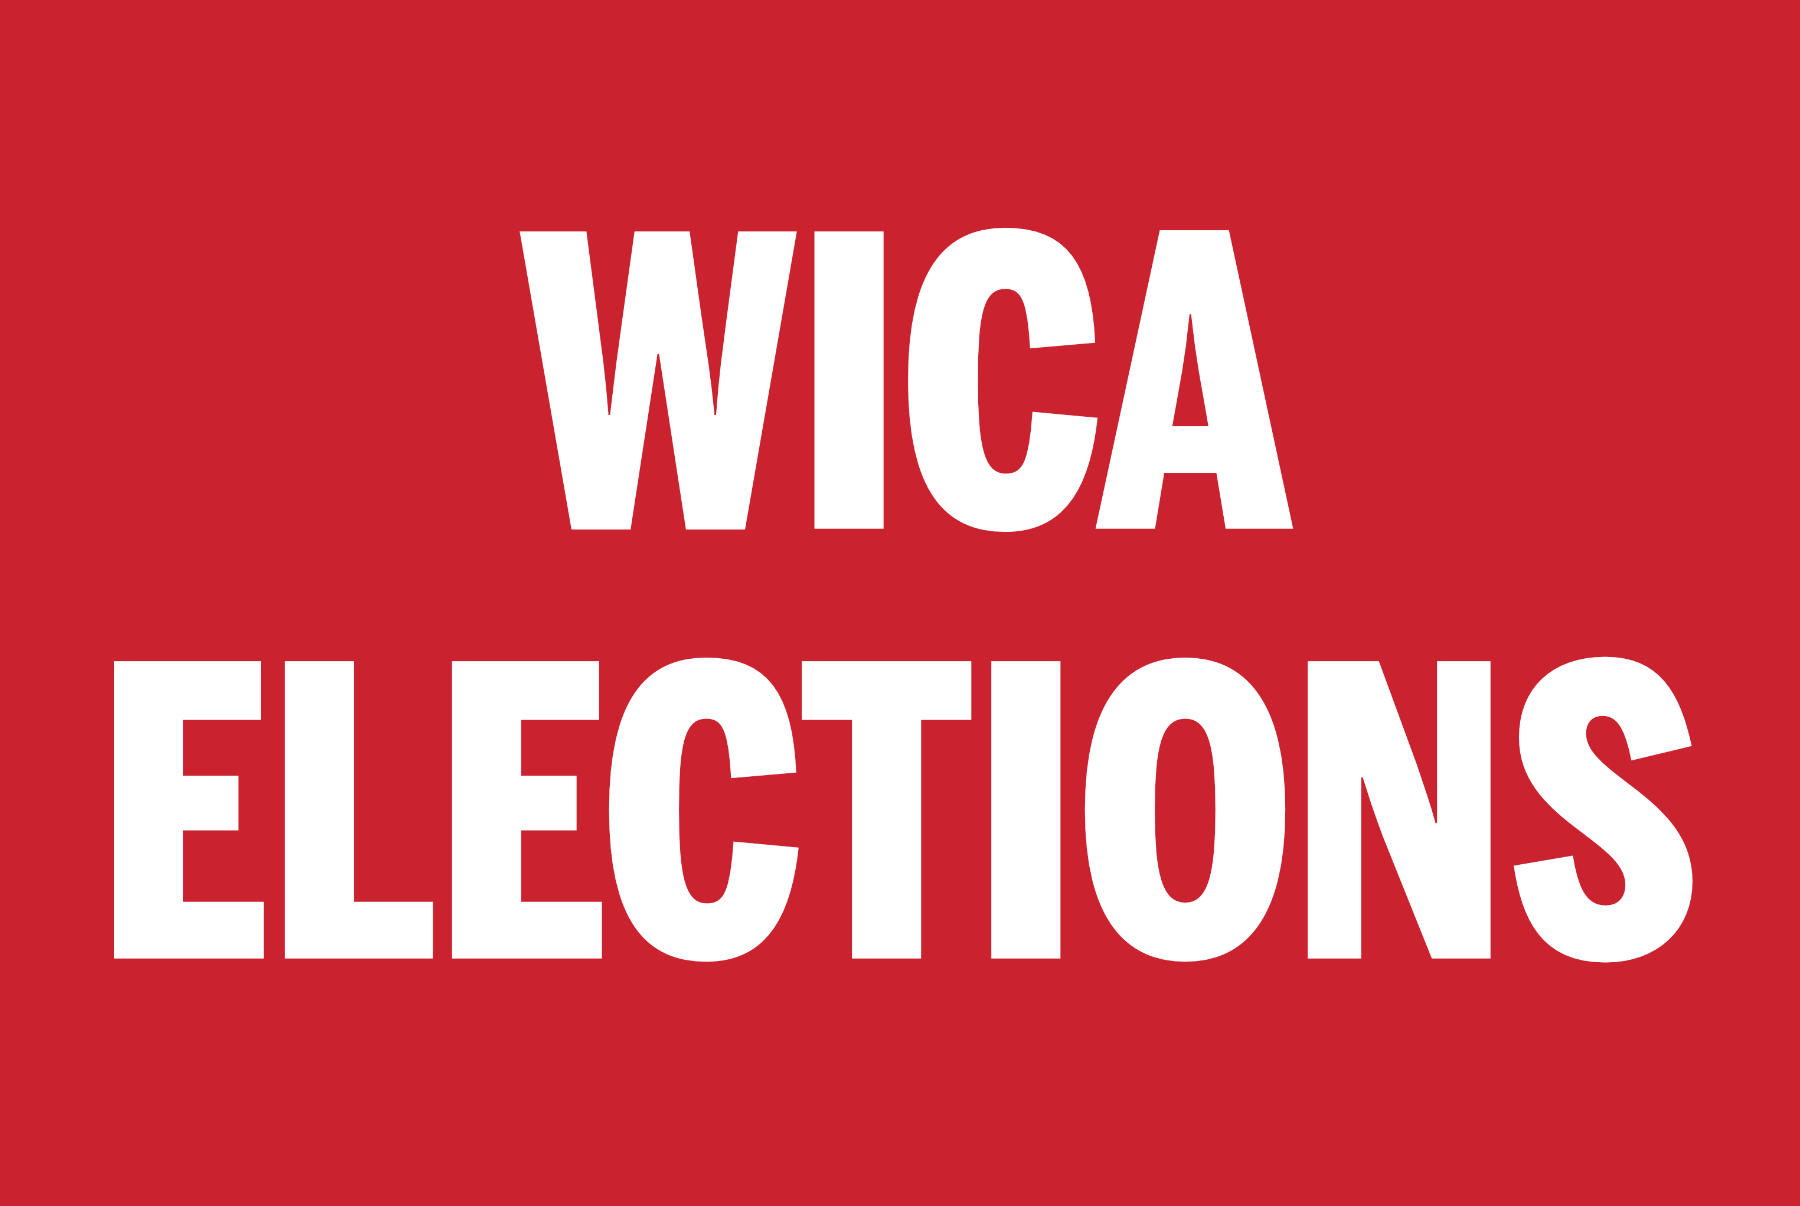 WICA ELECTIONS